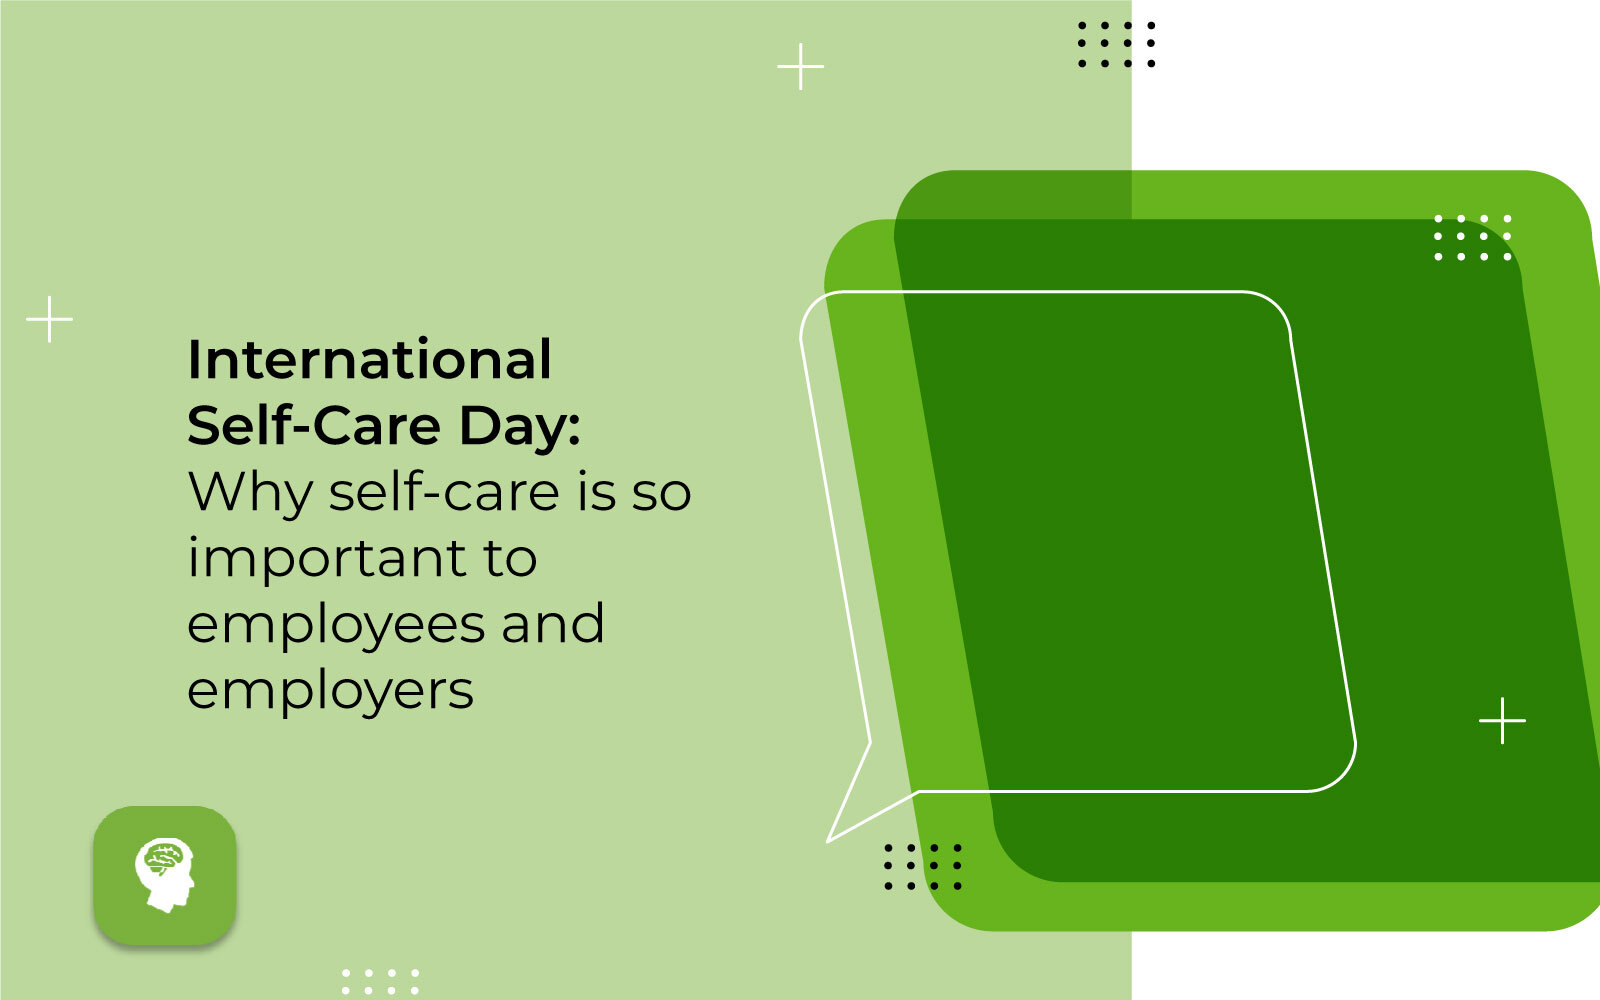 International Self-Care Day: Why self-care is so important to employees and employers